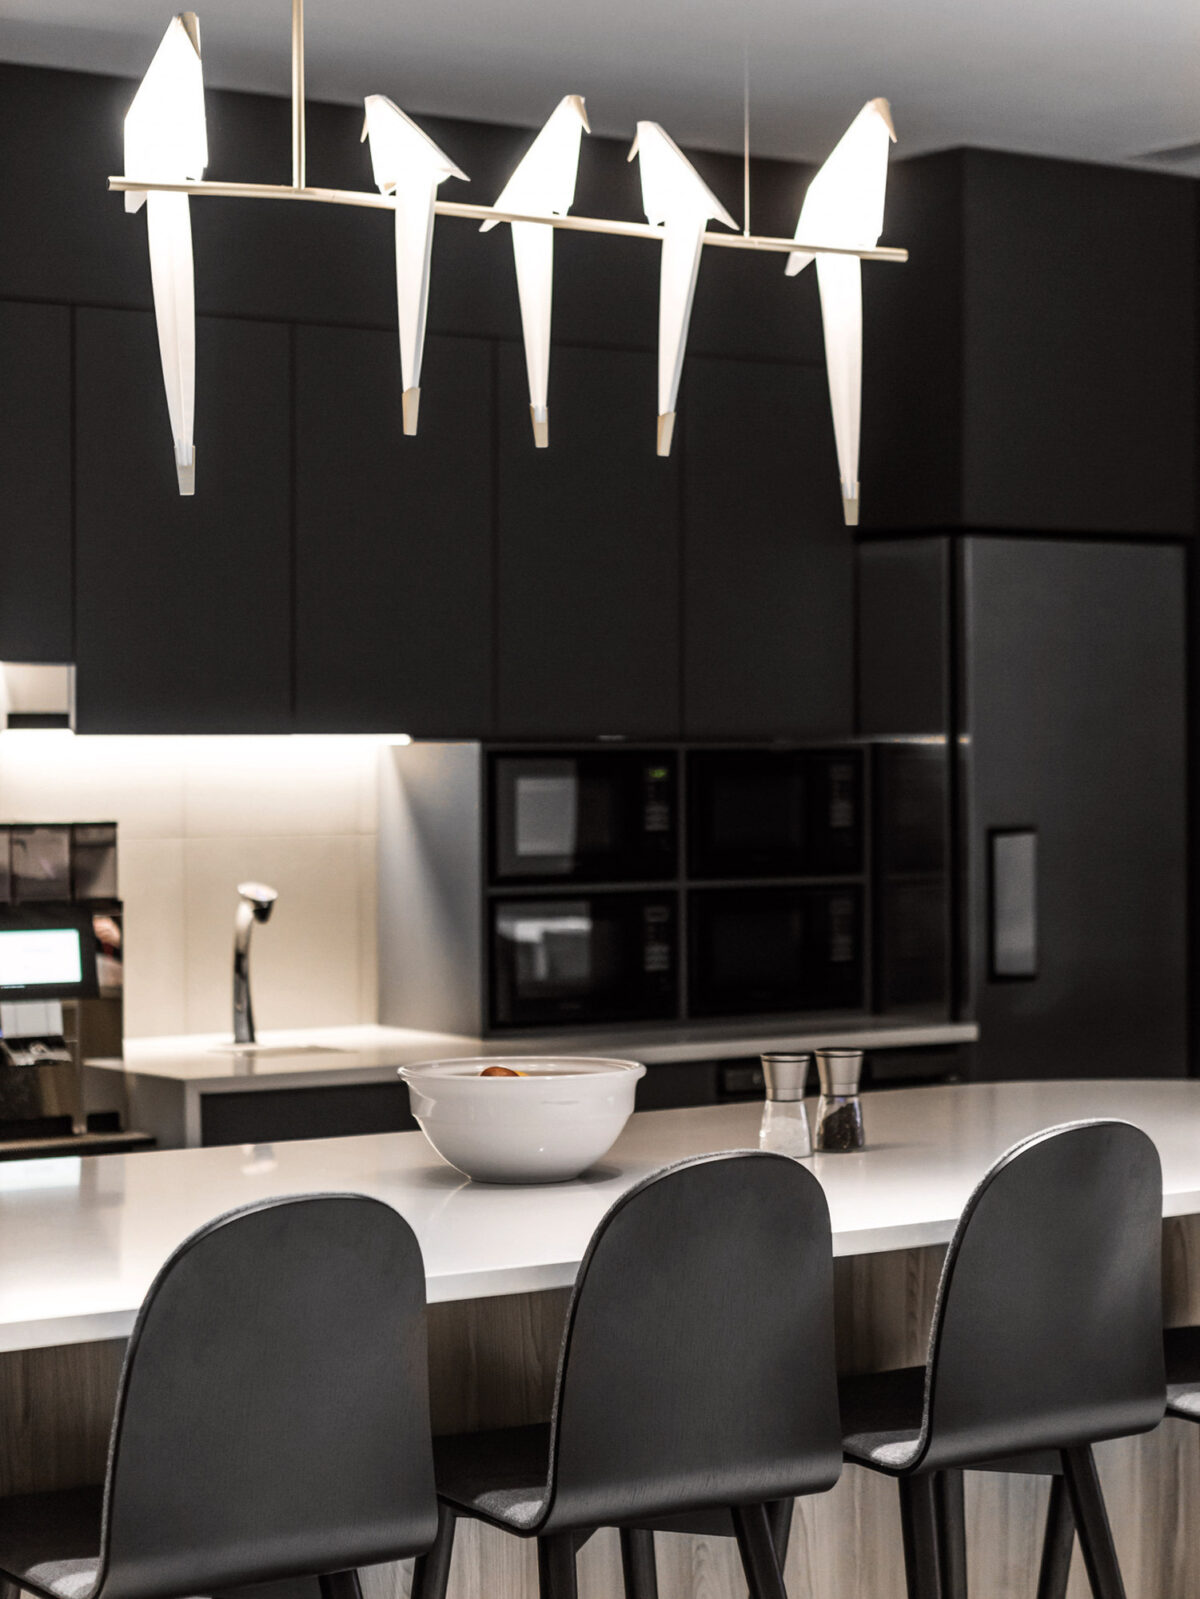 Sleek, modern kitchen with matte black cabinetry and pendant lighting resembling abstract birds in flight above a polished quartz countertop with bar seating.